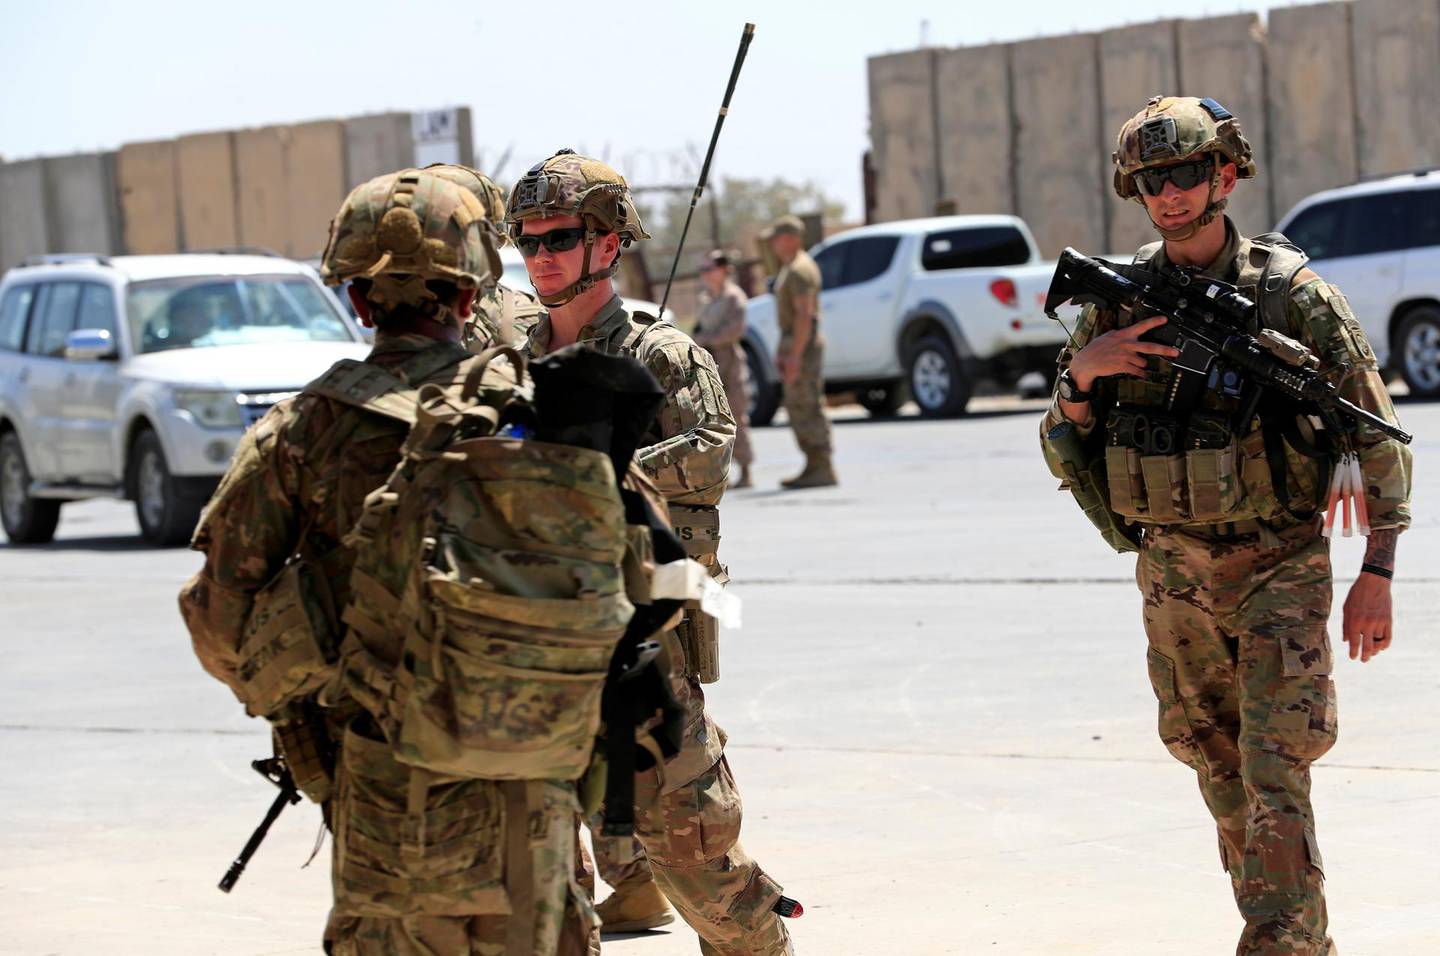 U.S. soldiers are seen during a handover ceremony of Taji military base from US-led coalition troops to Iraqi security forces, in the base north of Baghdad, Iraq August 23, 2020. REUTERS/Thaier Al-Sudani